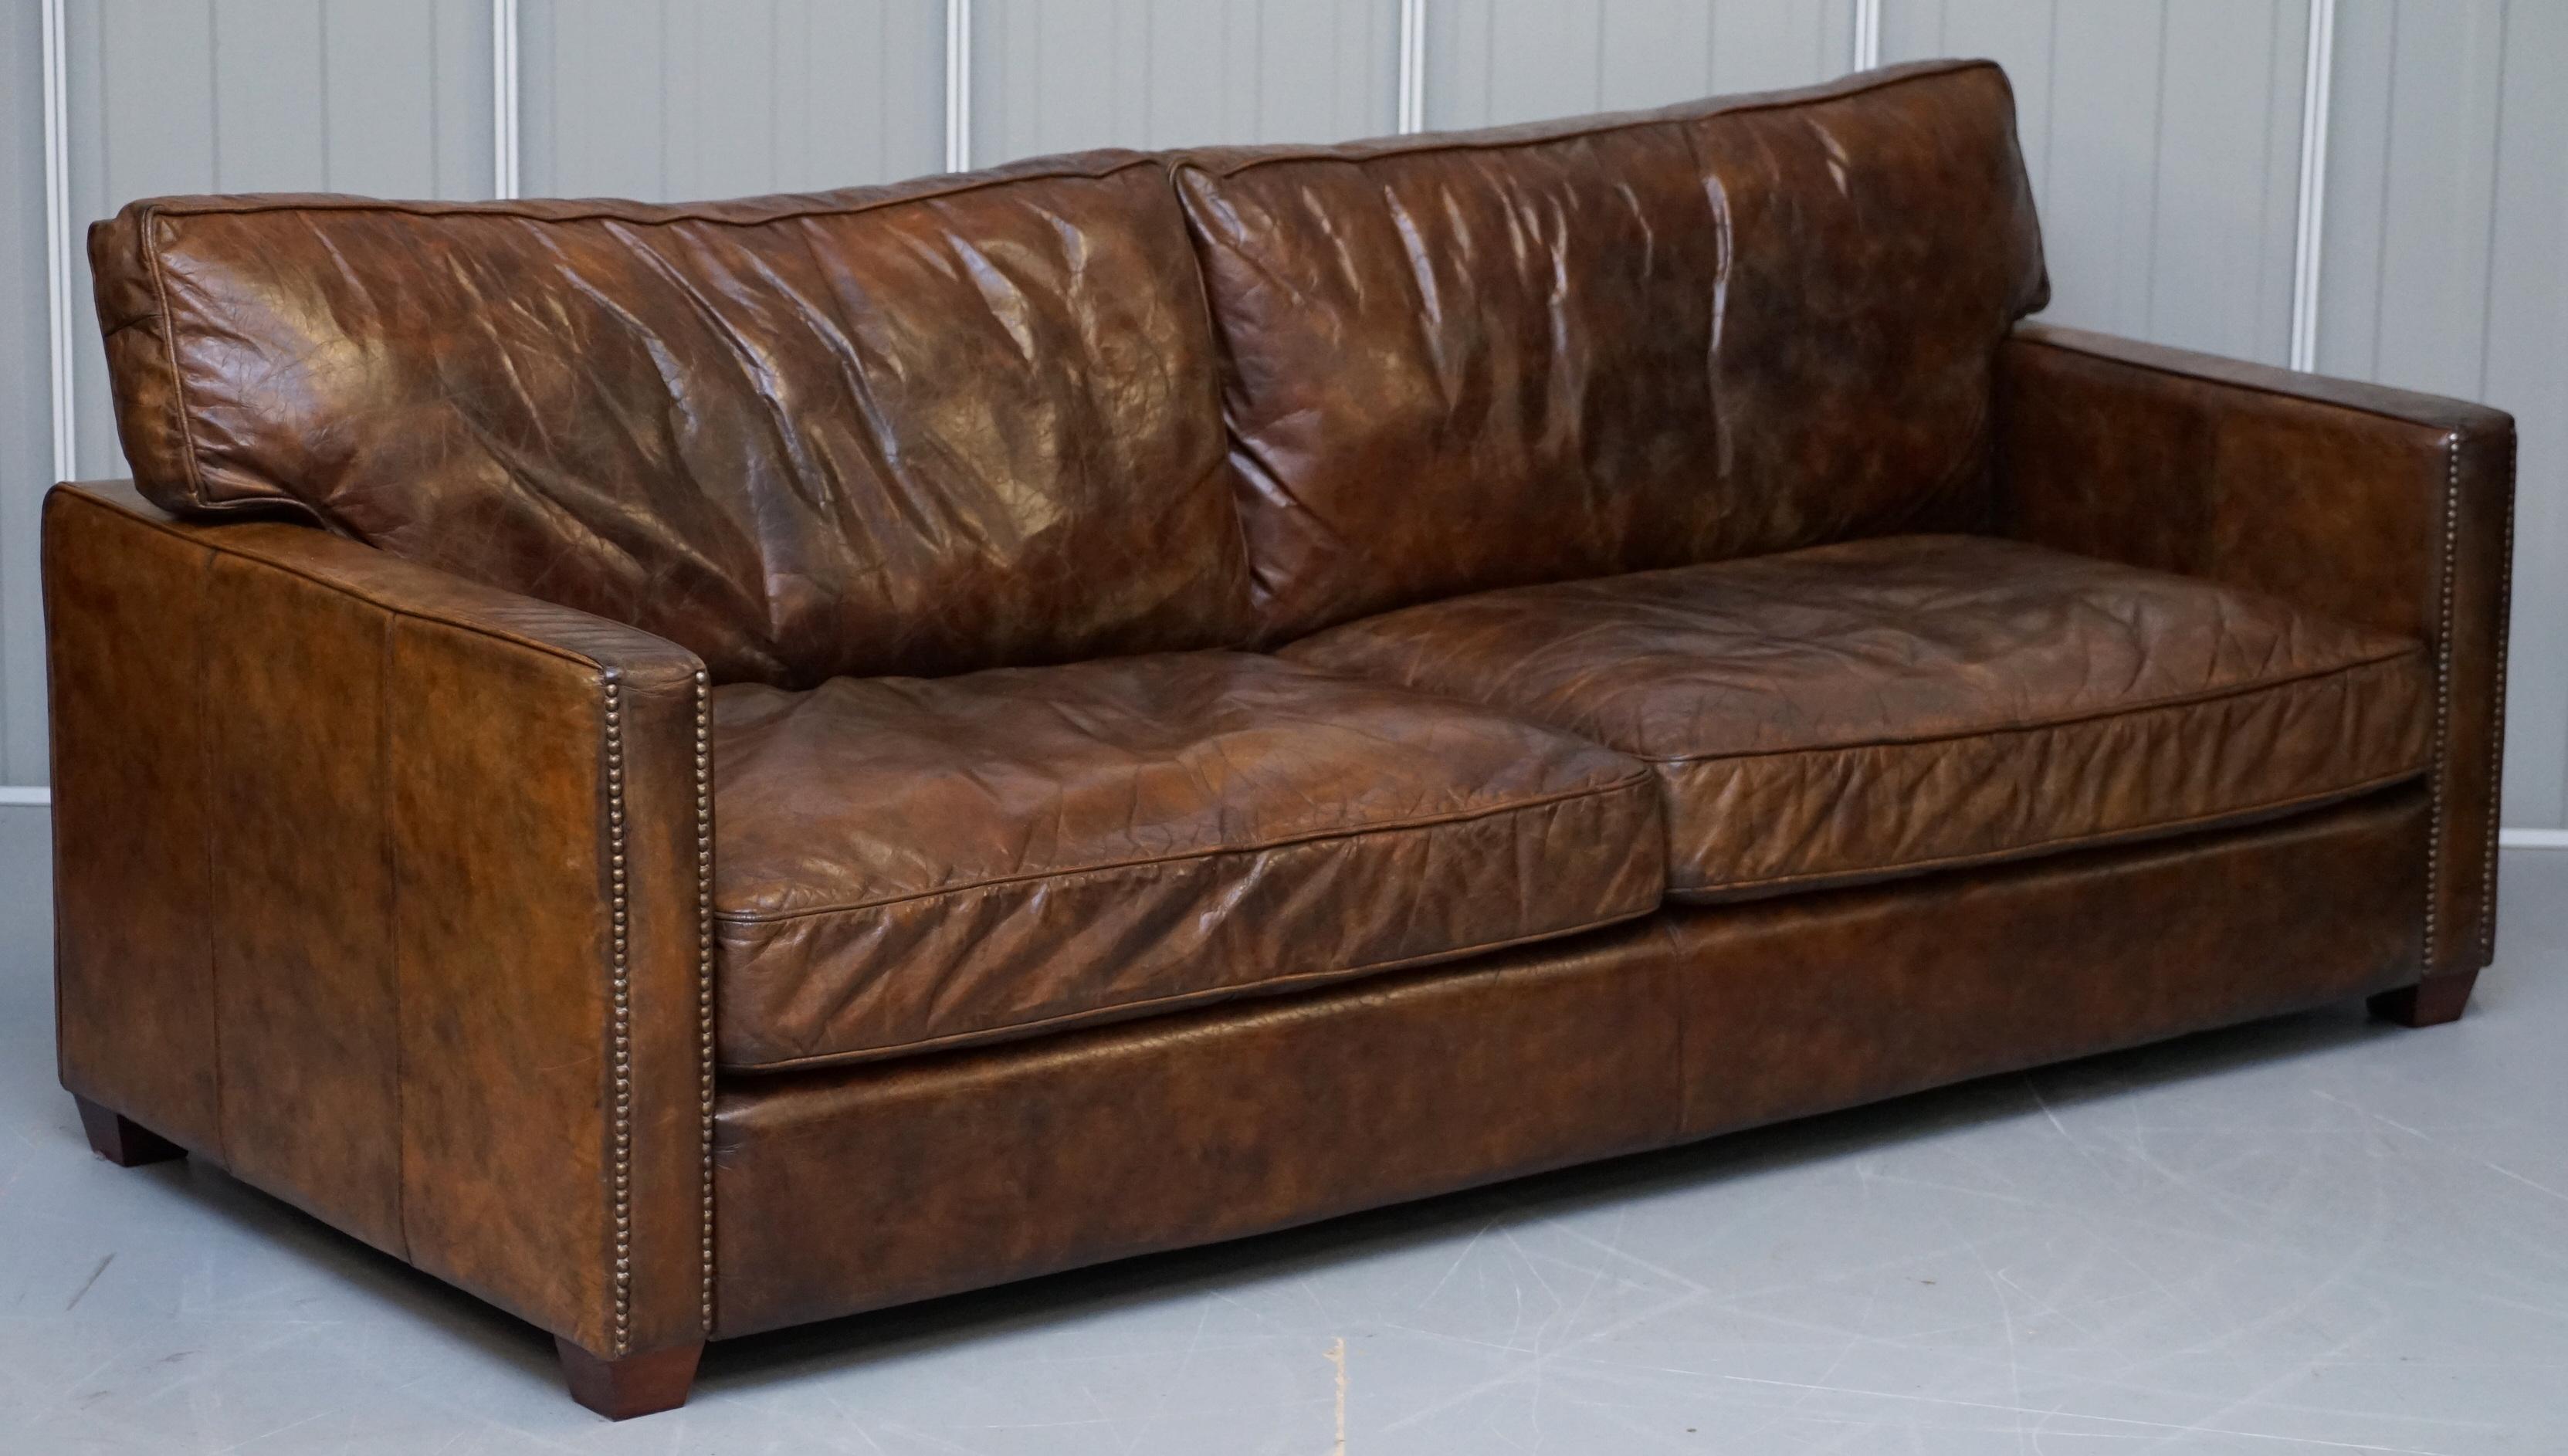 We are delighted to offer for sale this stunning original Timothy Oulton RRP £3975 Viscount William aged brown leather sofa

This sofa is in good used condition throughout, it has a lovely vintage heritage leather which is distressed and aged from